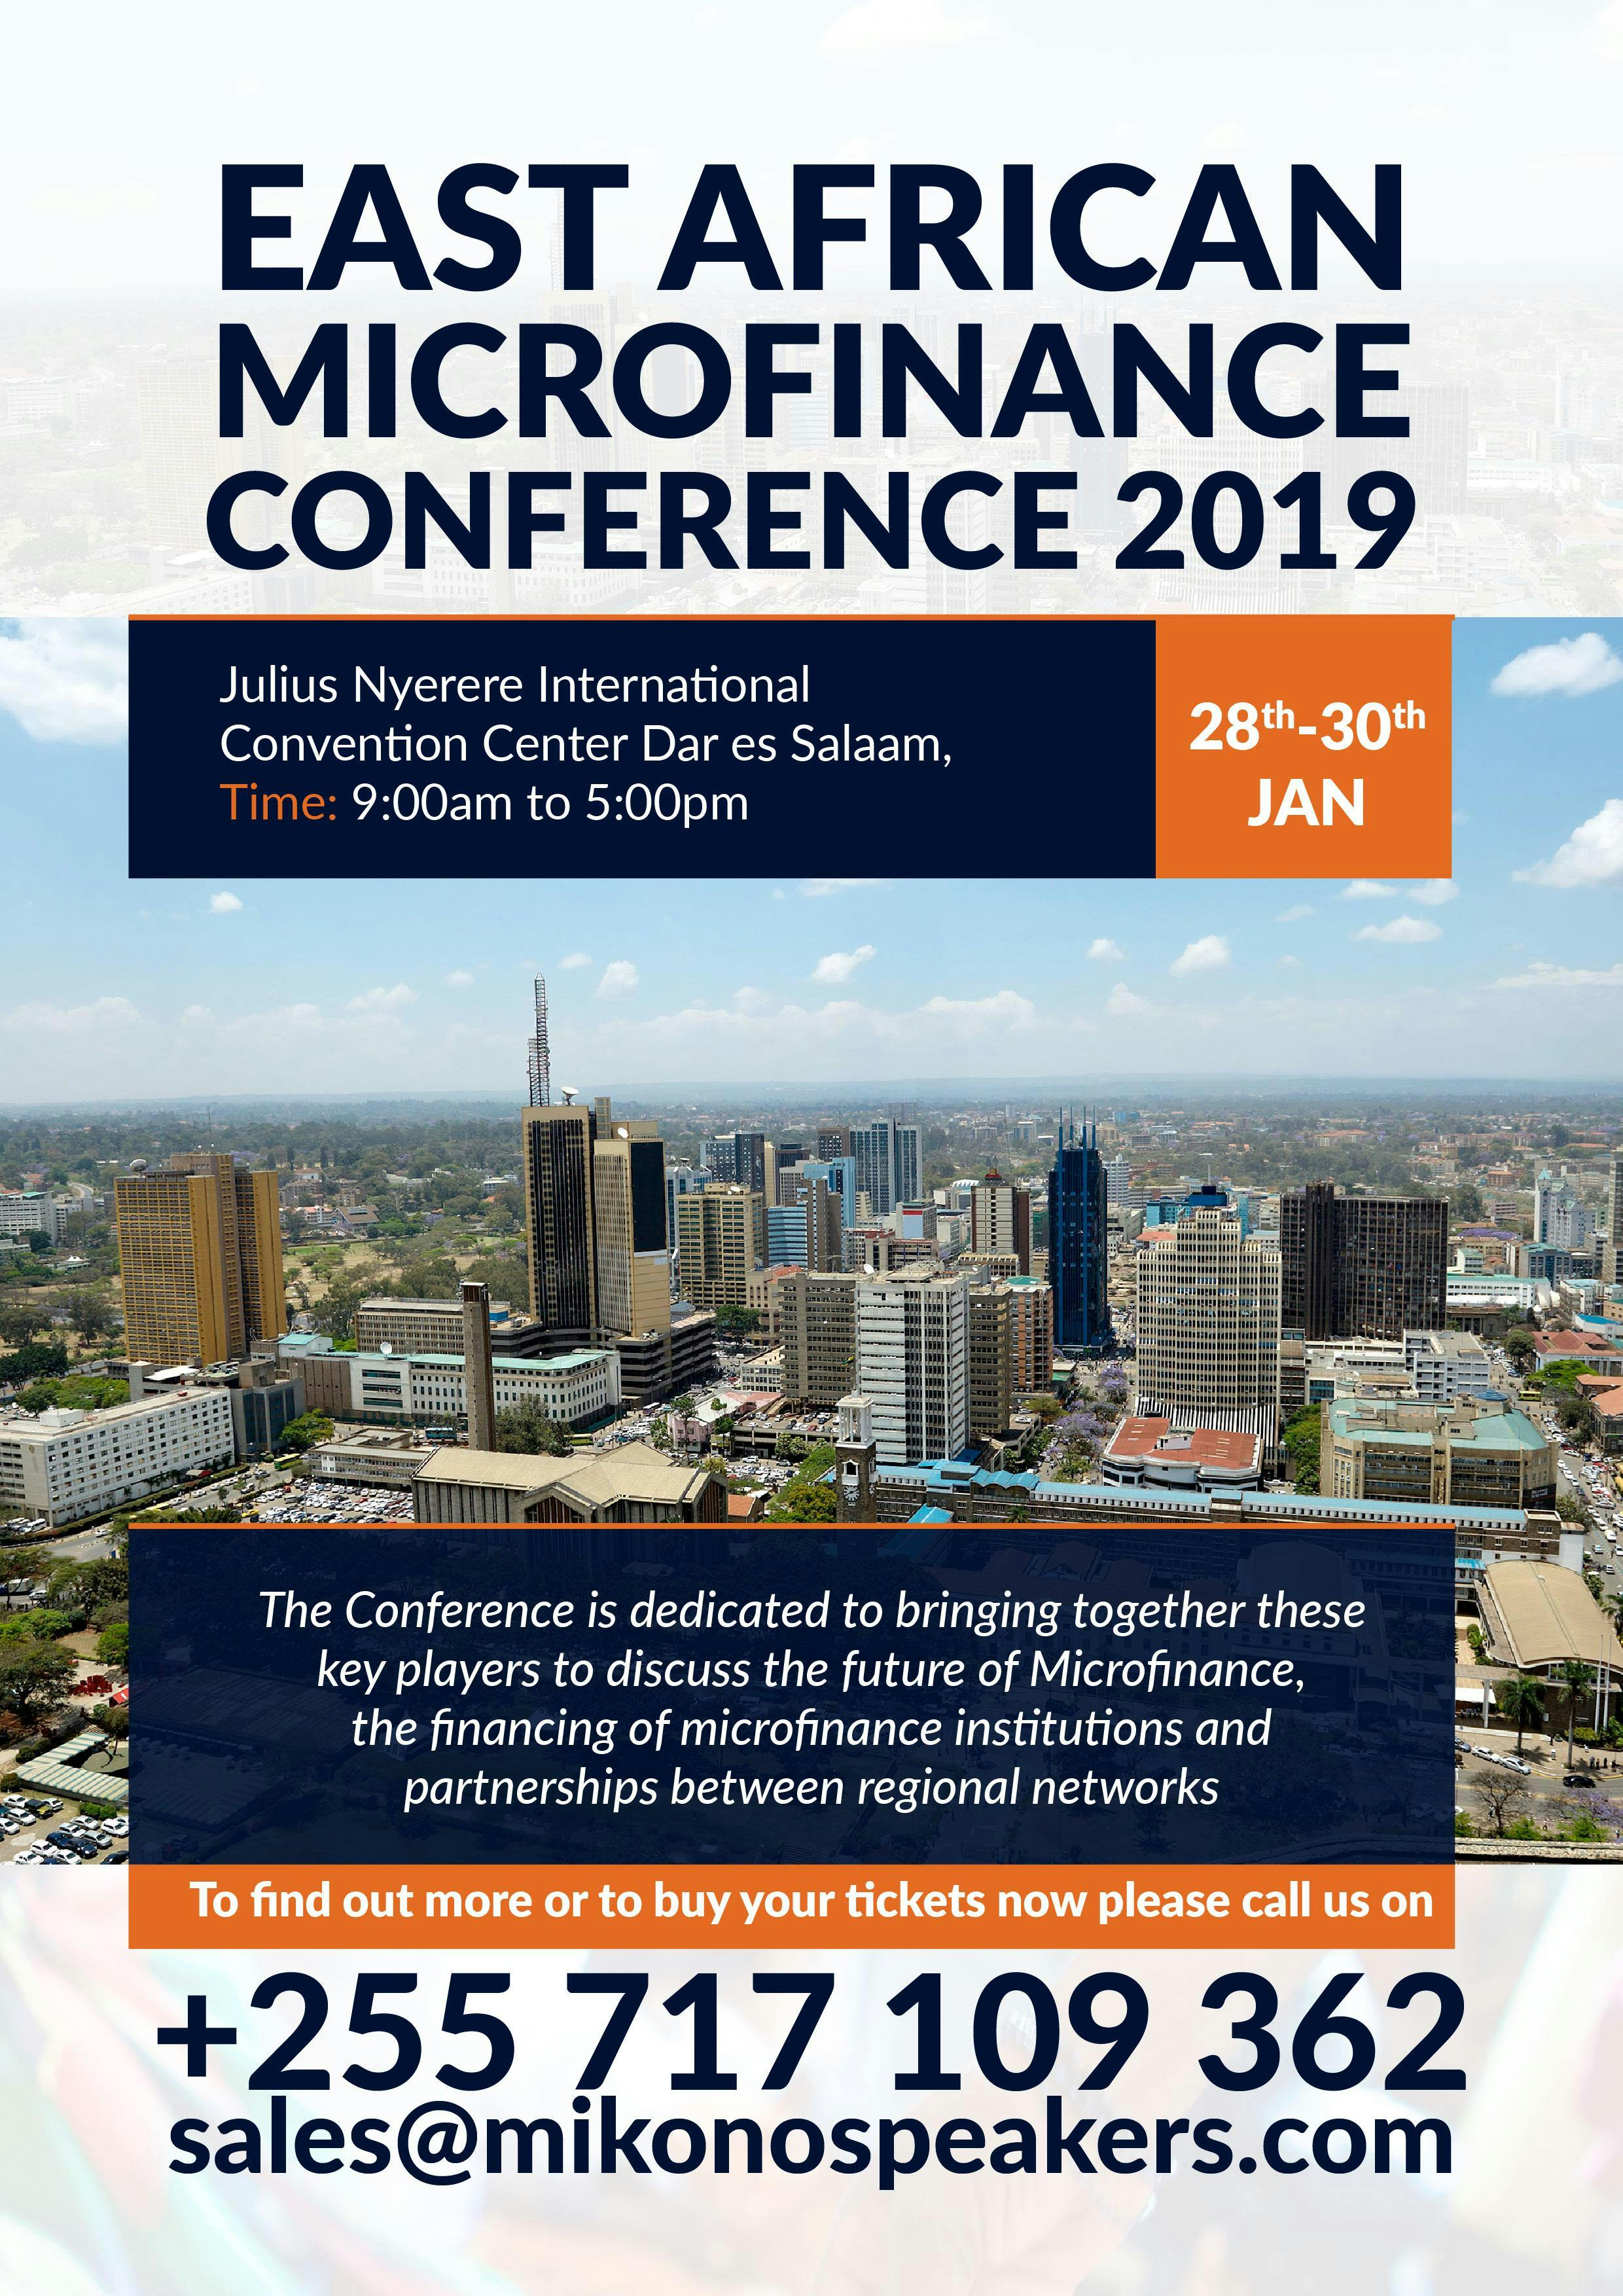 East African Microfinance Conference 2019